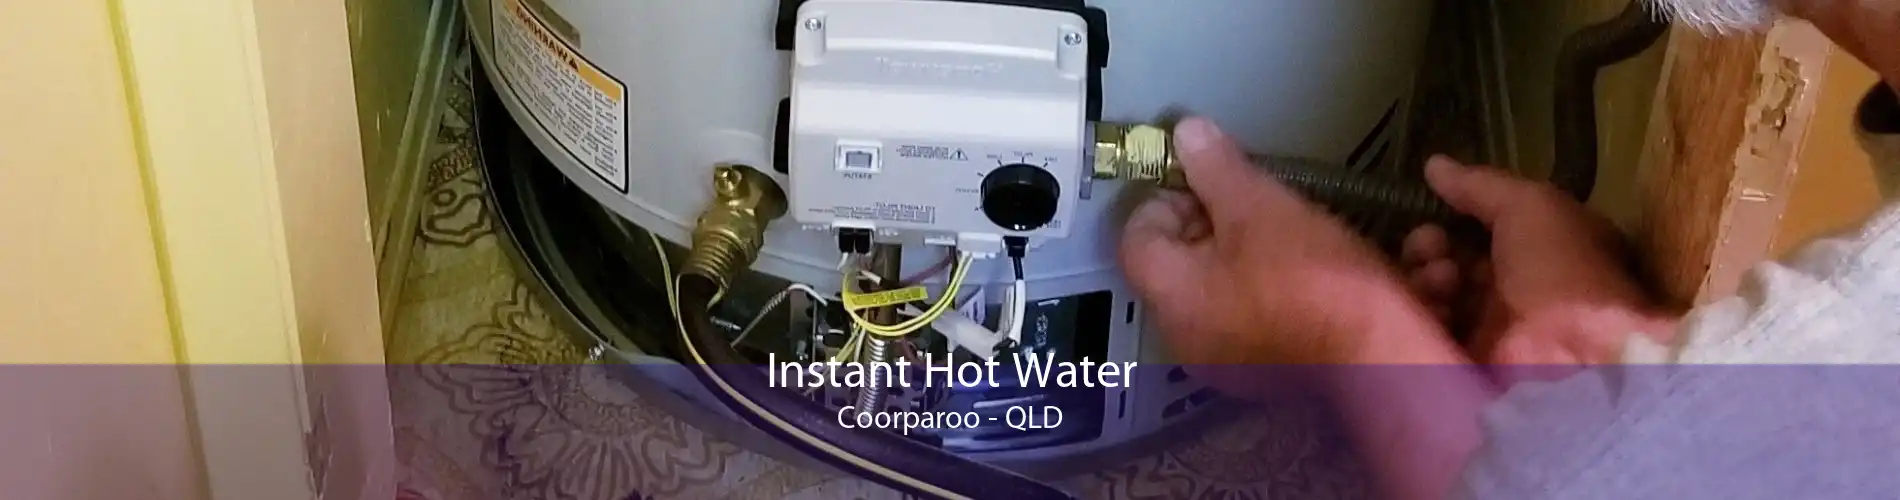 Instant Hot Water Coorparoo - QLD